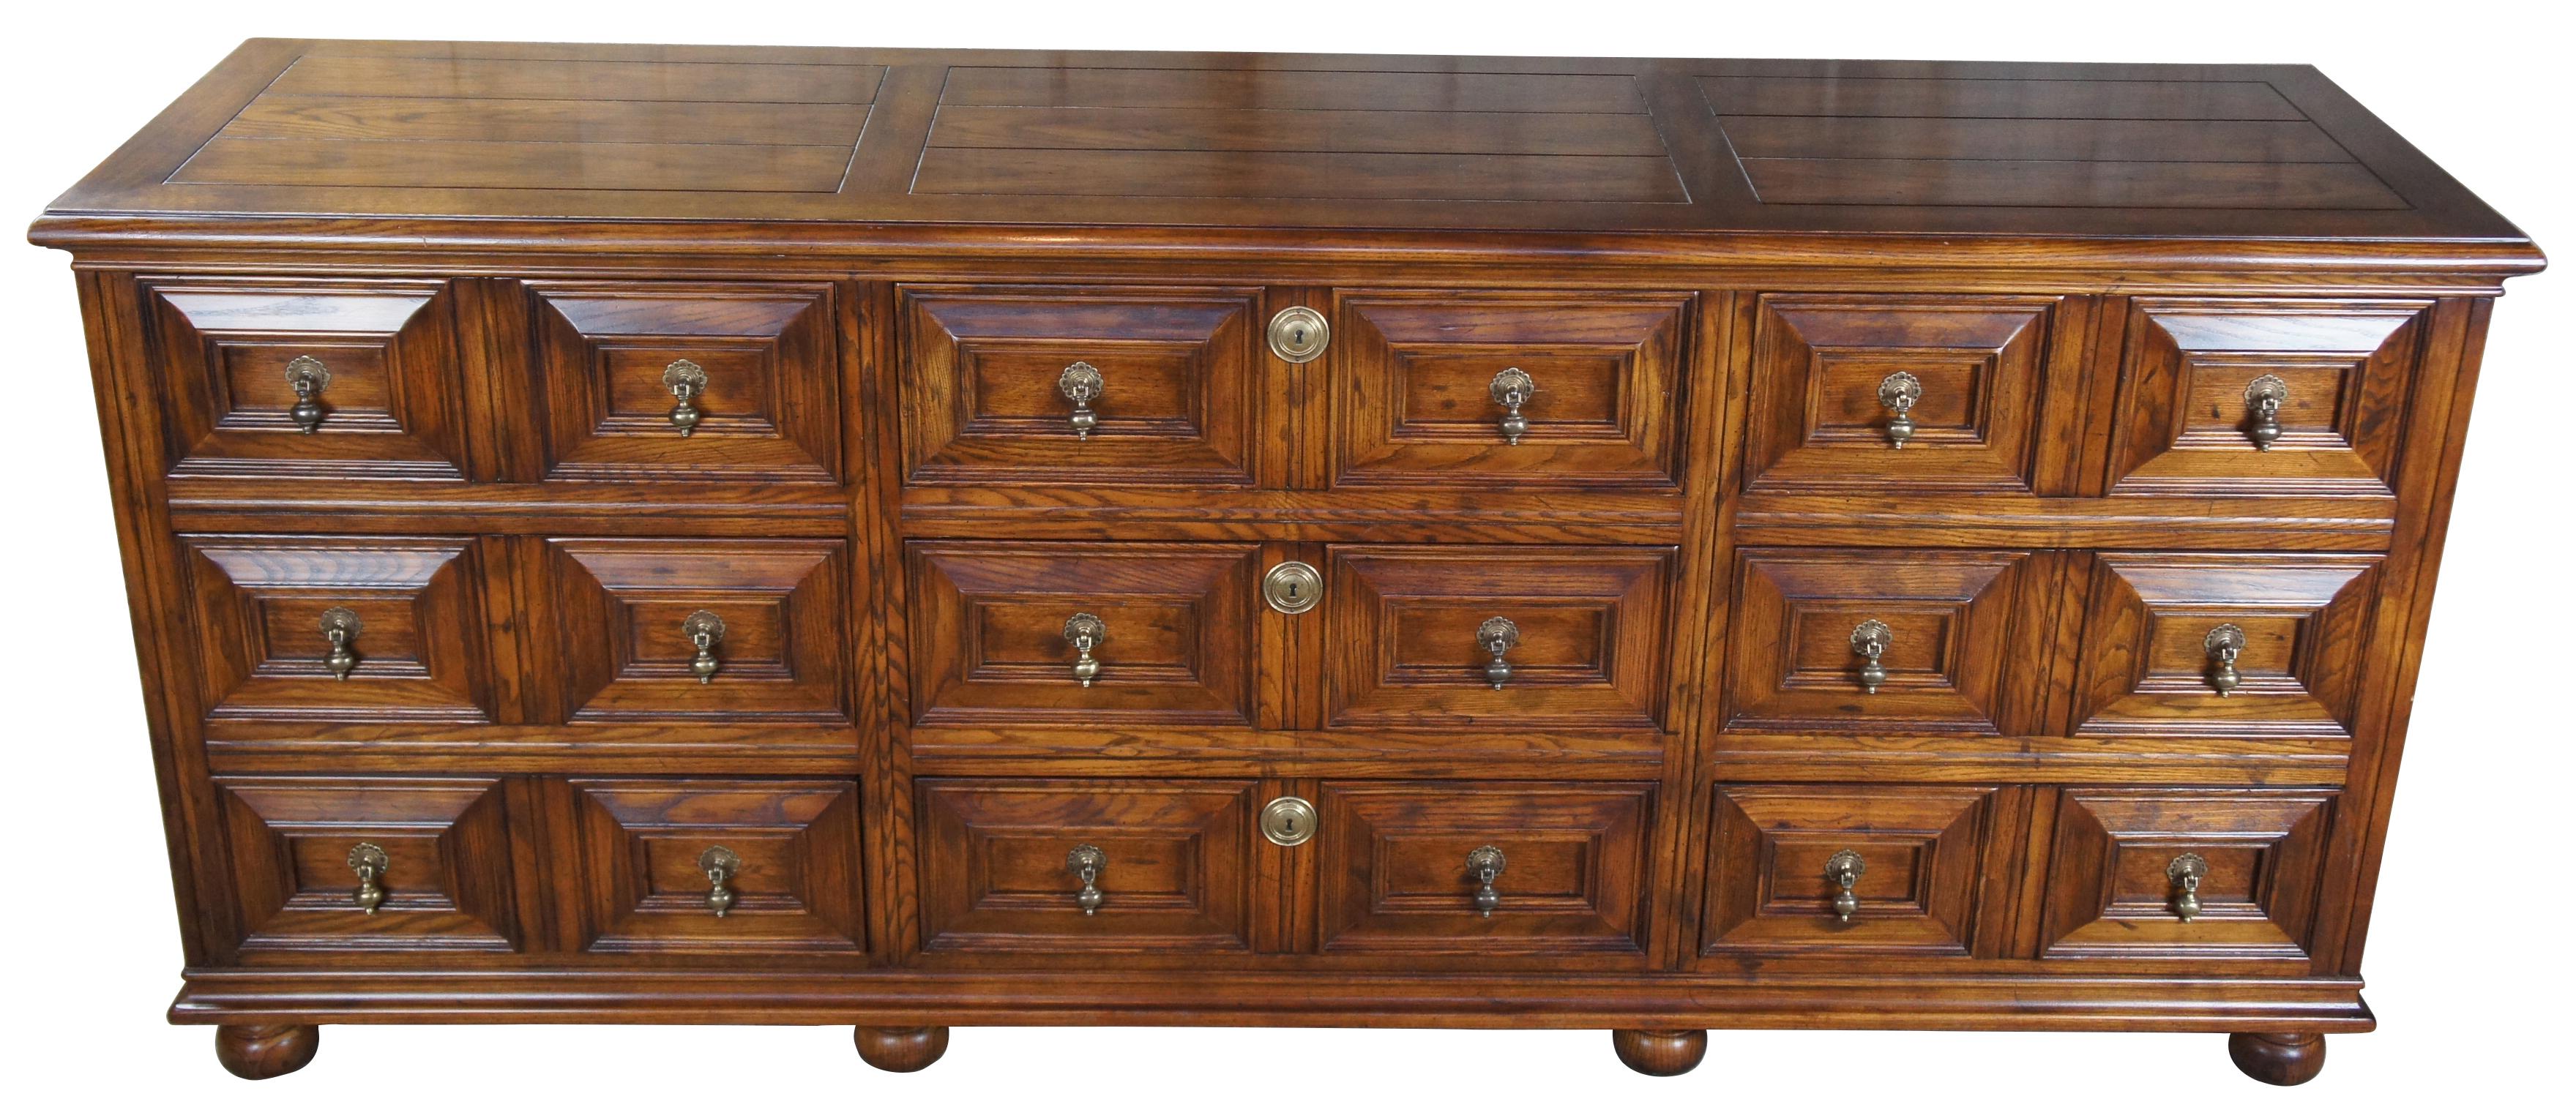 1979 Henredon folio 12 nine-drawer dresser. Made from oak with Classic 18th century English styling. Includes robust paneled drawer fronts with Victorian inspired knockers, brass key plates and bun feet.
   